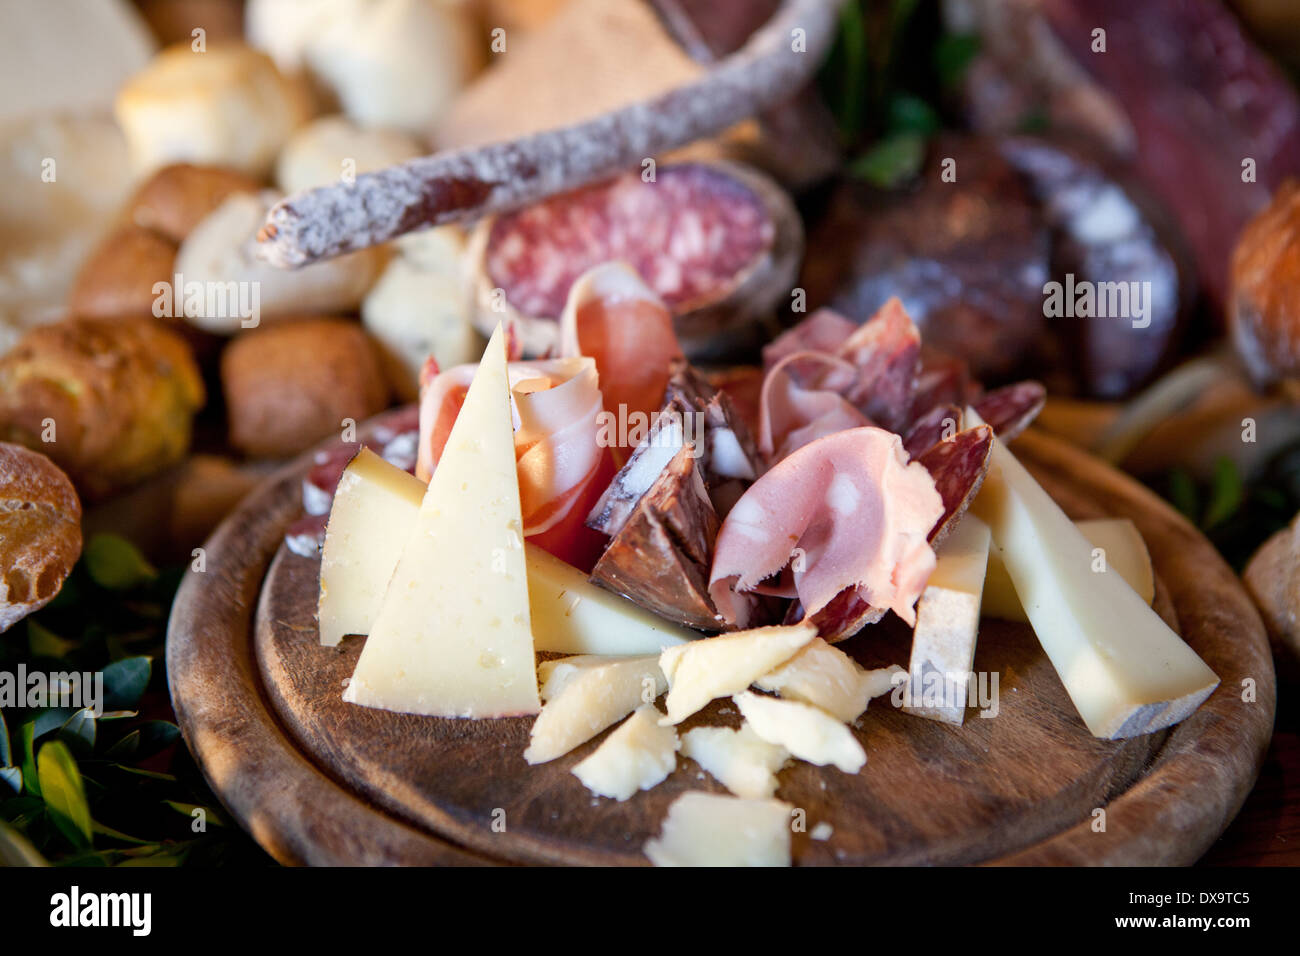 cold cuts, salami, homemade bread and tuscany cheese Stock Photo